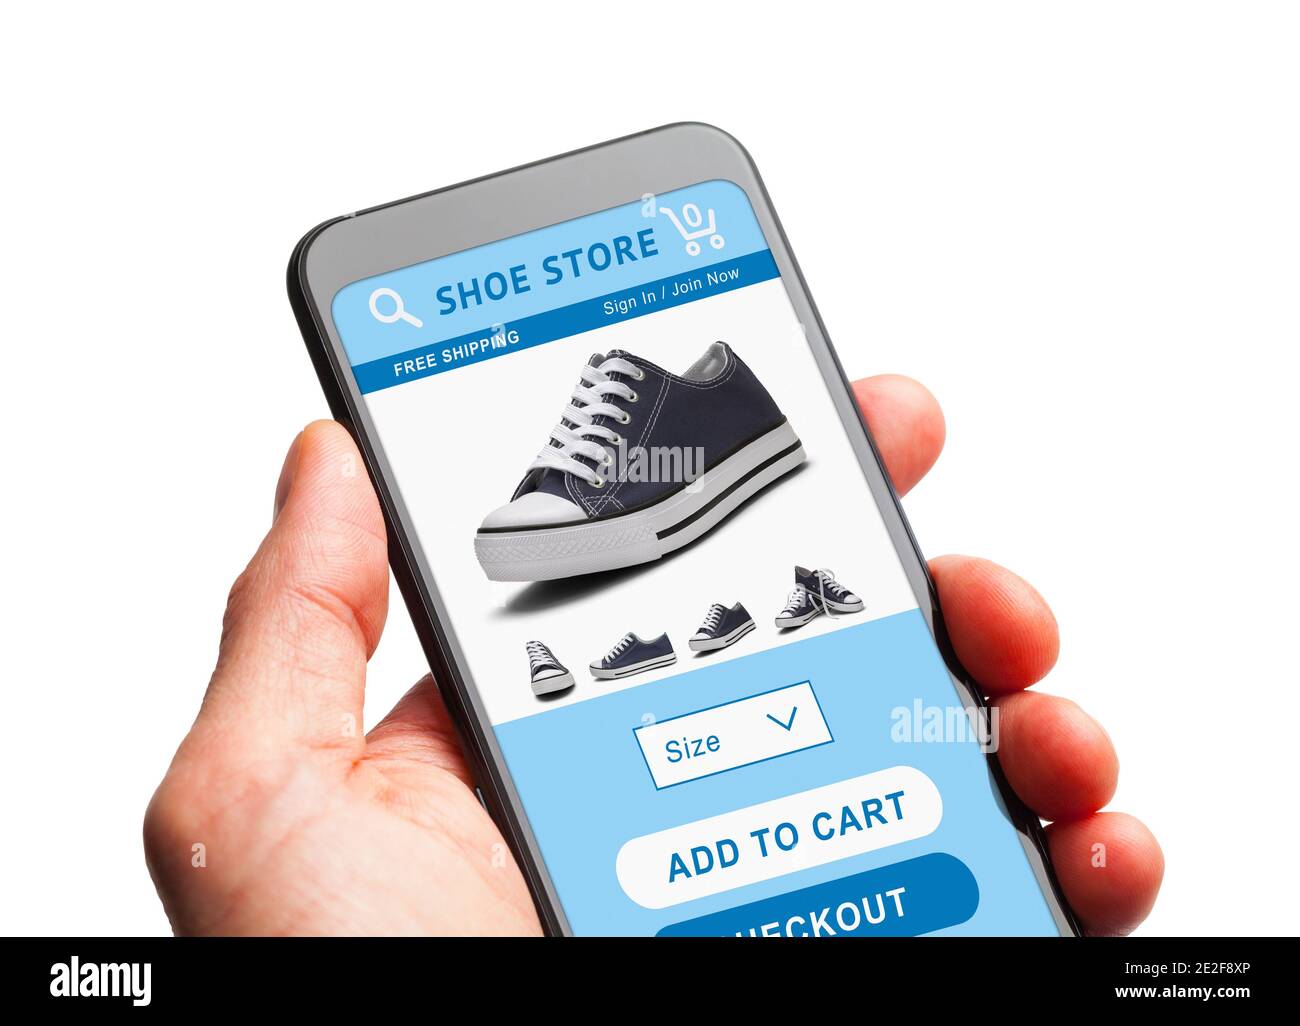 Hand Holding Smart Phone Shopping at  Online Shoe Store. Stock Photo